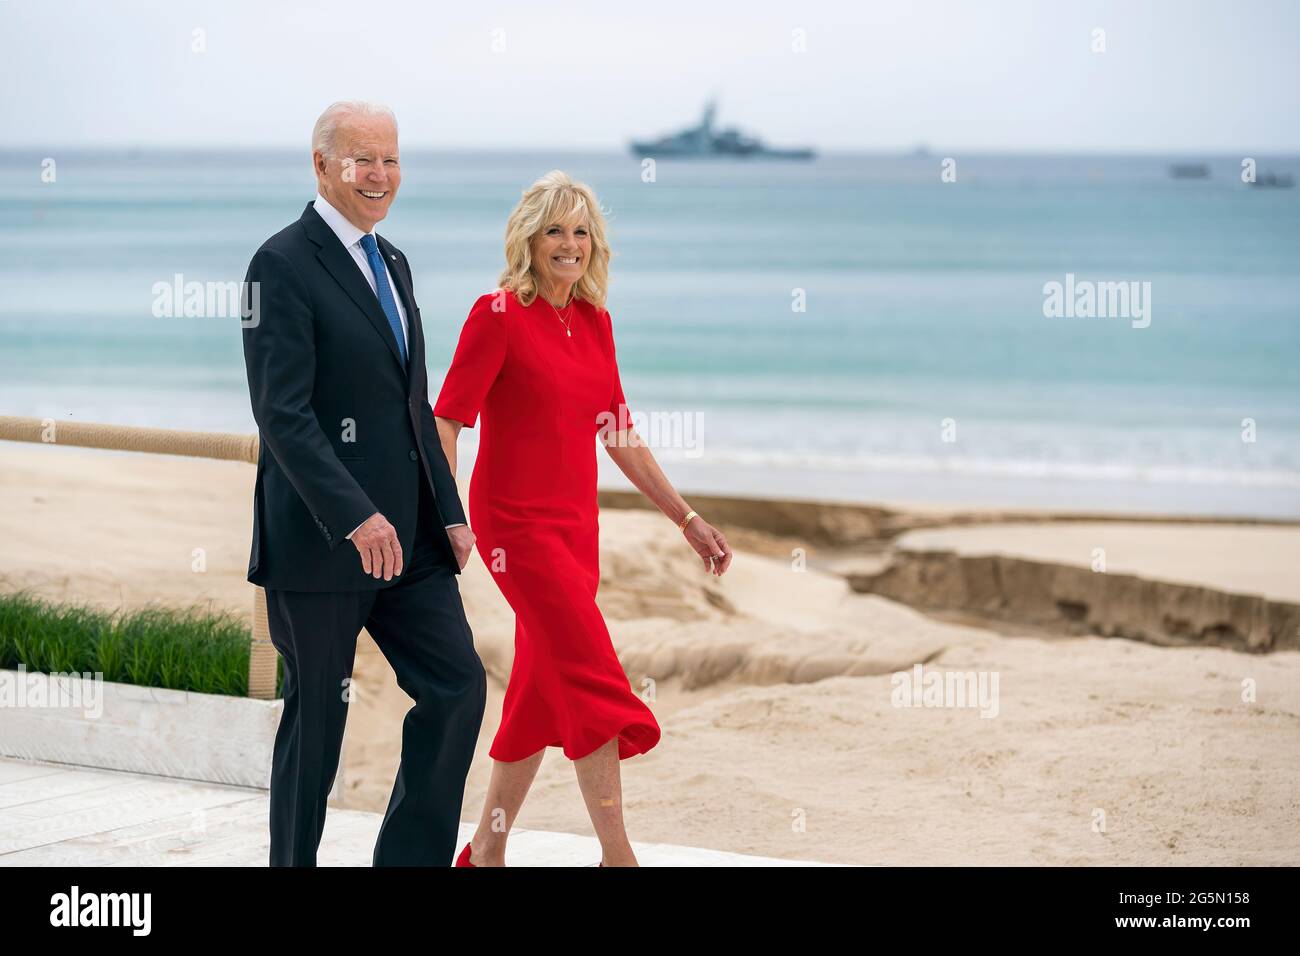 President Joe Biden and First Lady Jill Biden walk along the beach at the Carbis Bay Hotel and Estate for the G7 welcome ceremony Friday, June 11, 2021 in St. Ives, Cornwall, England. (Official White House Photo by Adam Schultz) Stock Photo